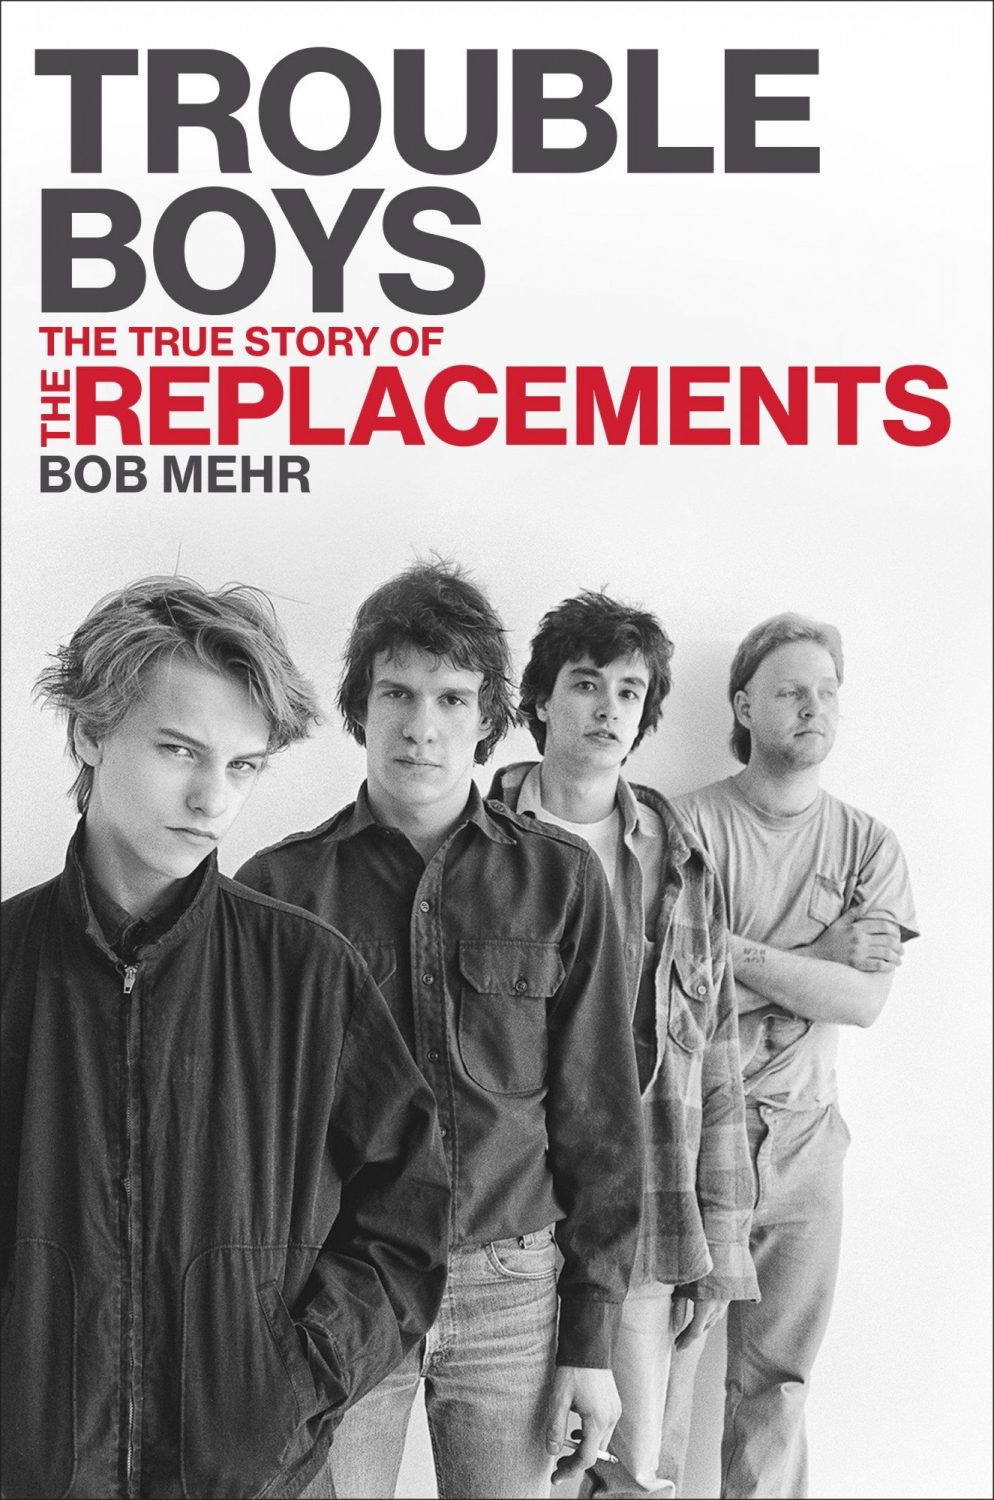 “Trouble Boys” author Bob Mehr to appear at The Strand Bookstore on Jun. 8, talks Replacements and more